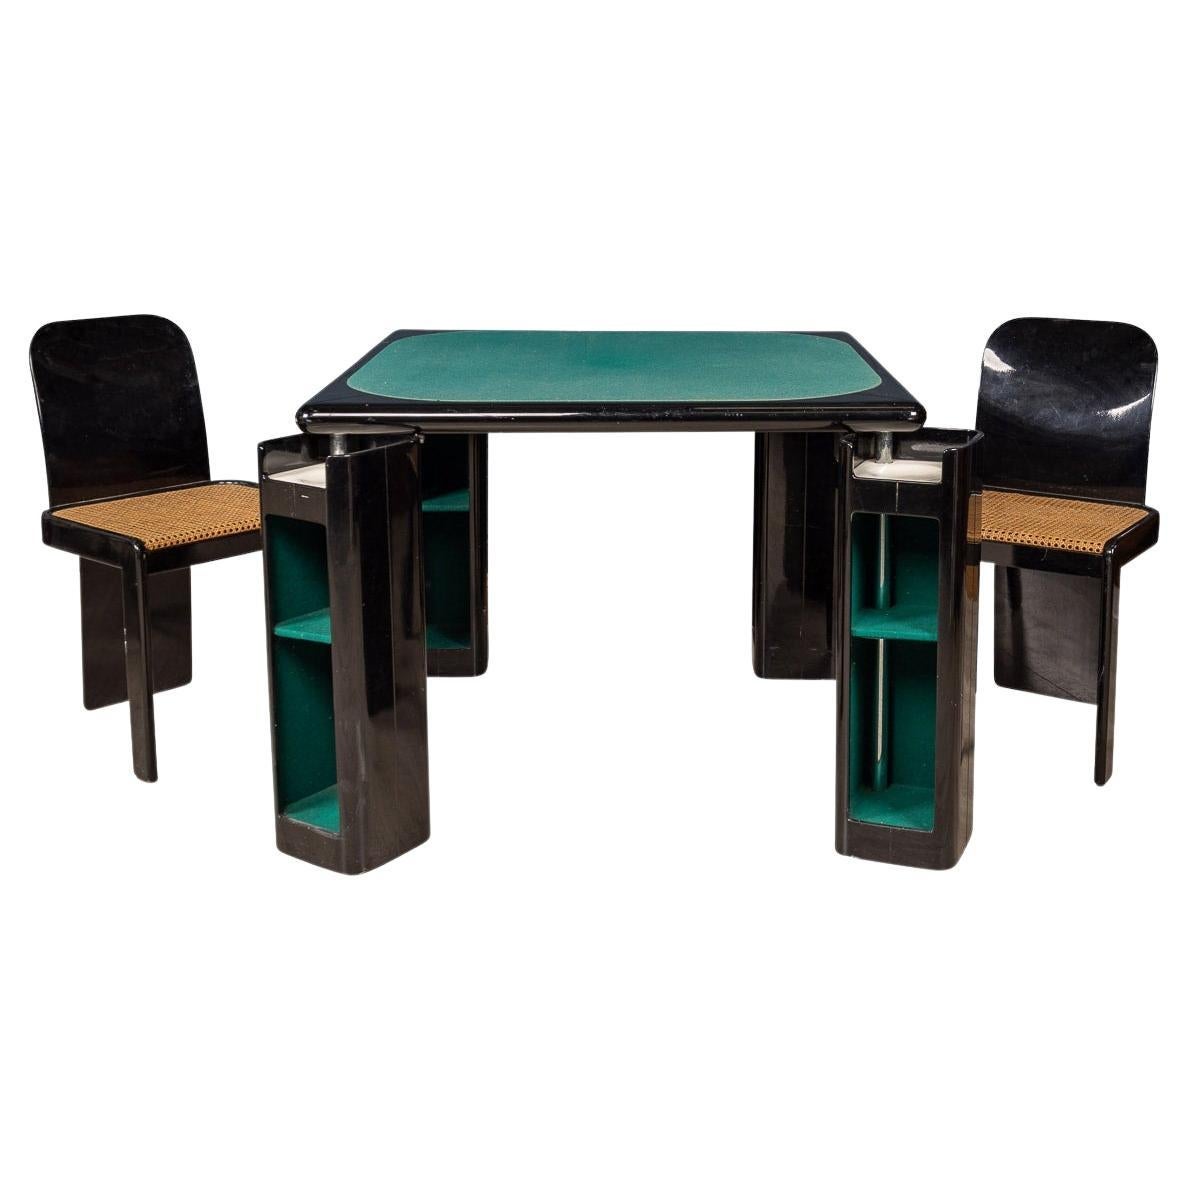 Lacquered Wood Games Table & Chairs by Pierluigi Molinari for Pozzi, Milan